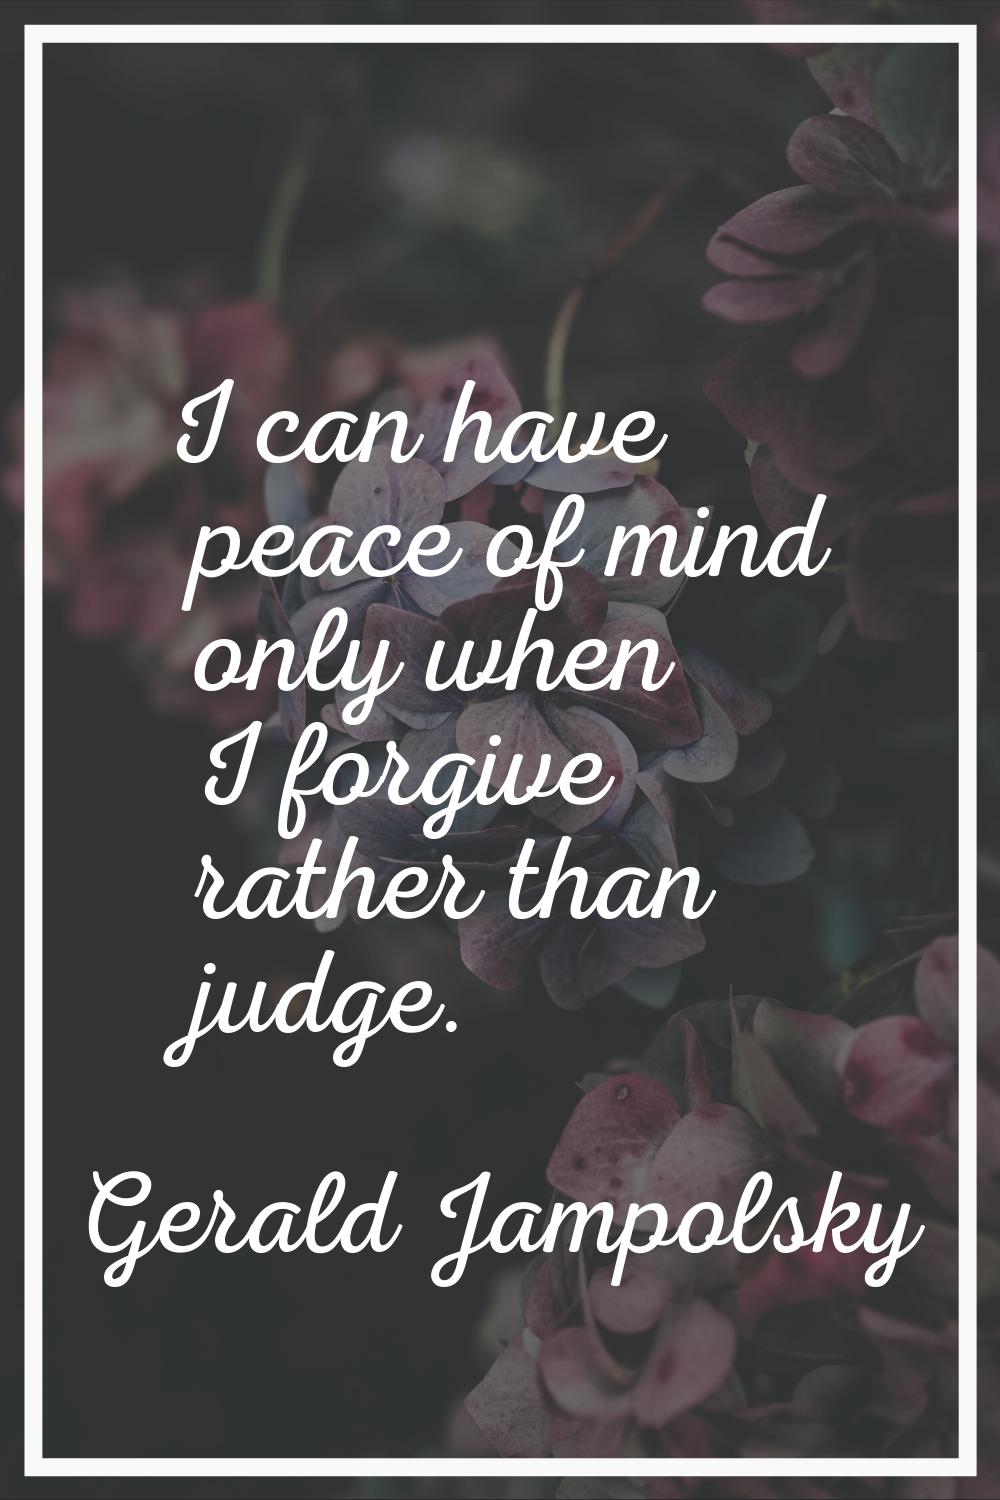 I can have peace of mind only when I forgive rather than judge.